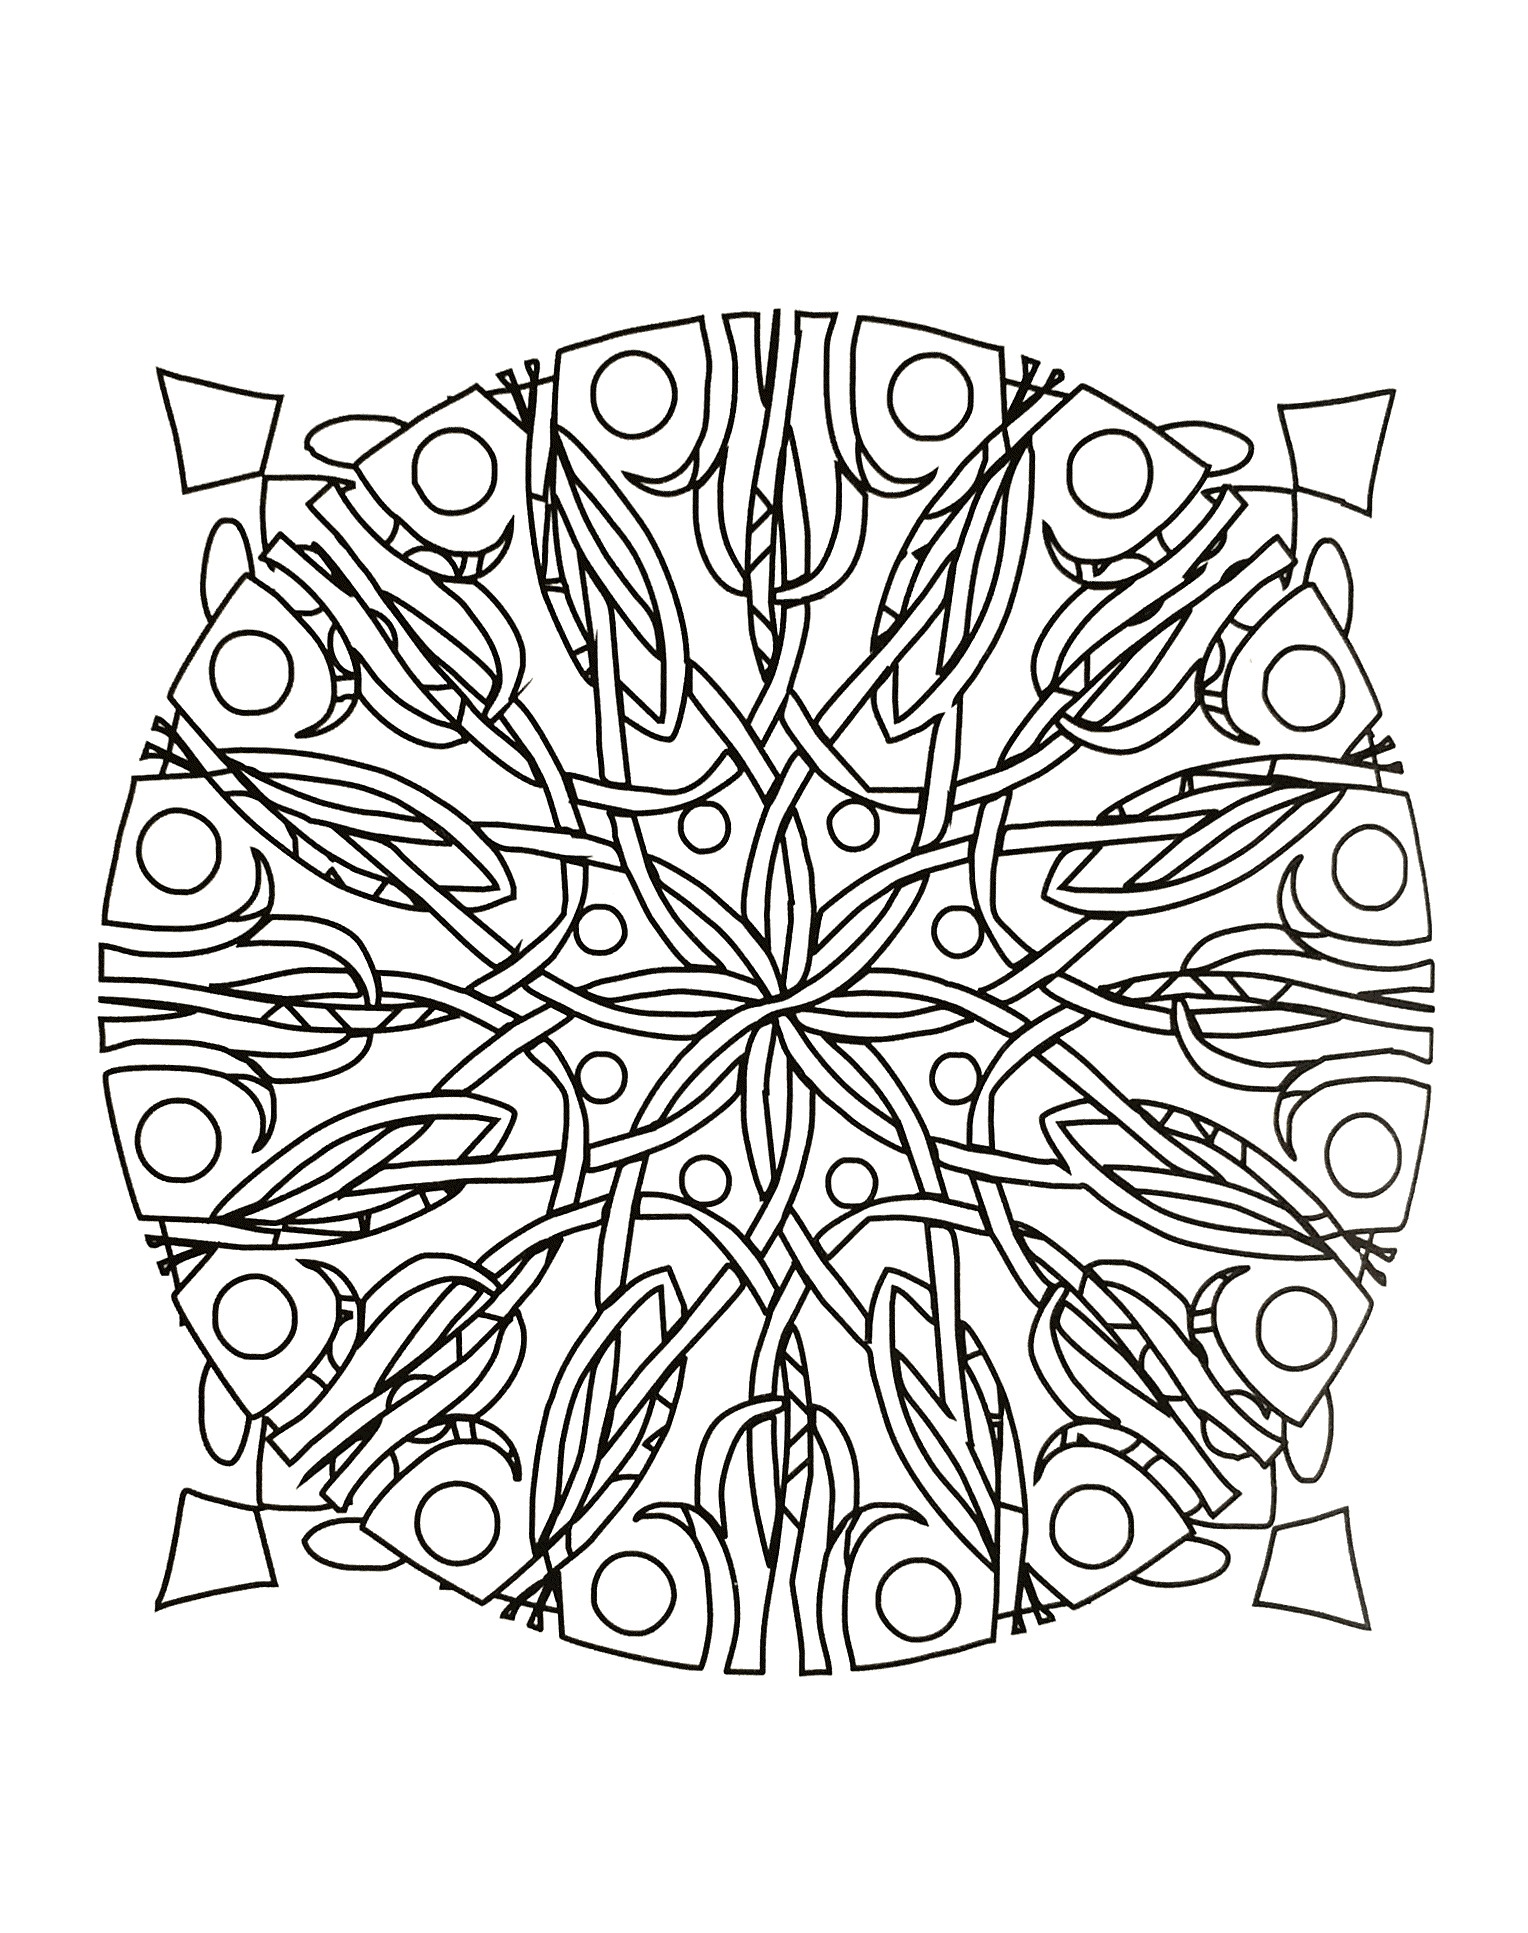 If you are ready to spend long minutes of relaxation, get ready to color this complex Mandala ... You can use many colors if you wish. You must clear your mind and allow yourself to forget all your worries and responsibilities.